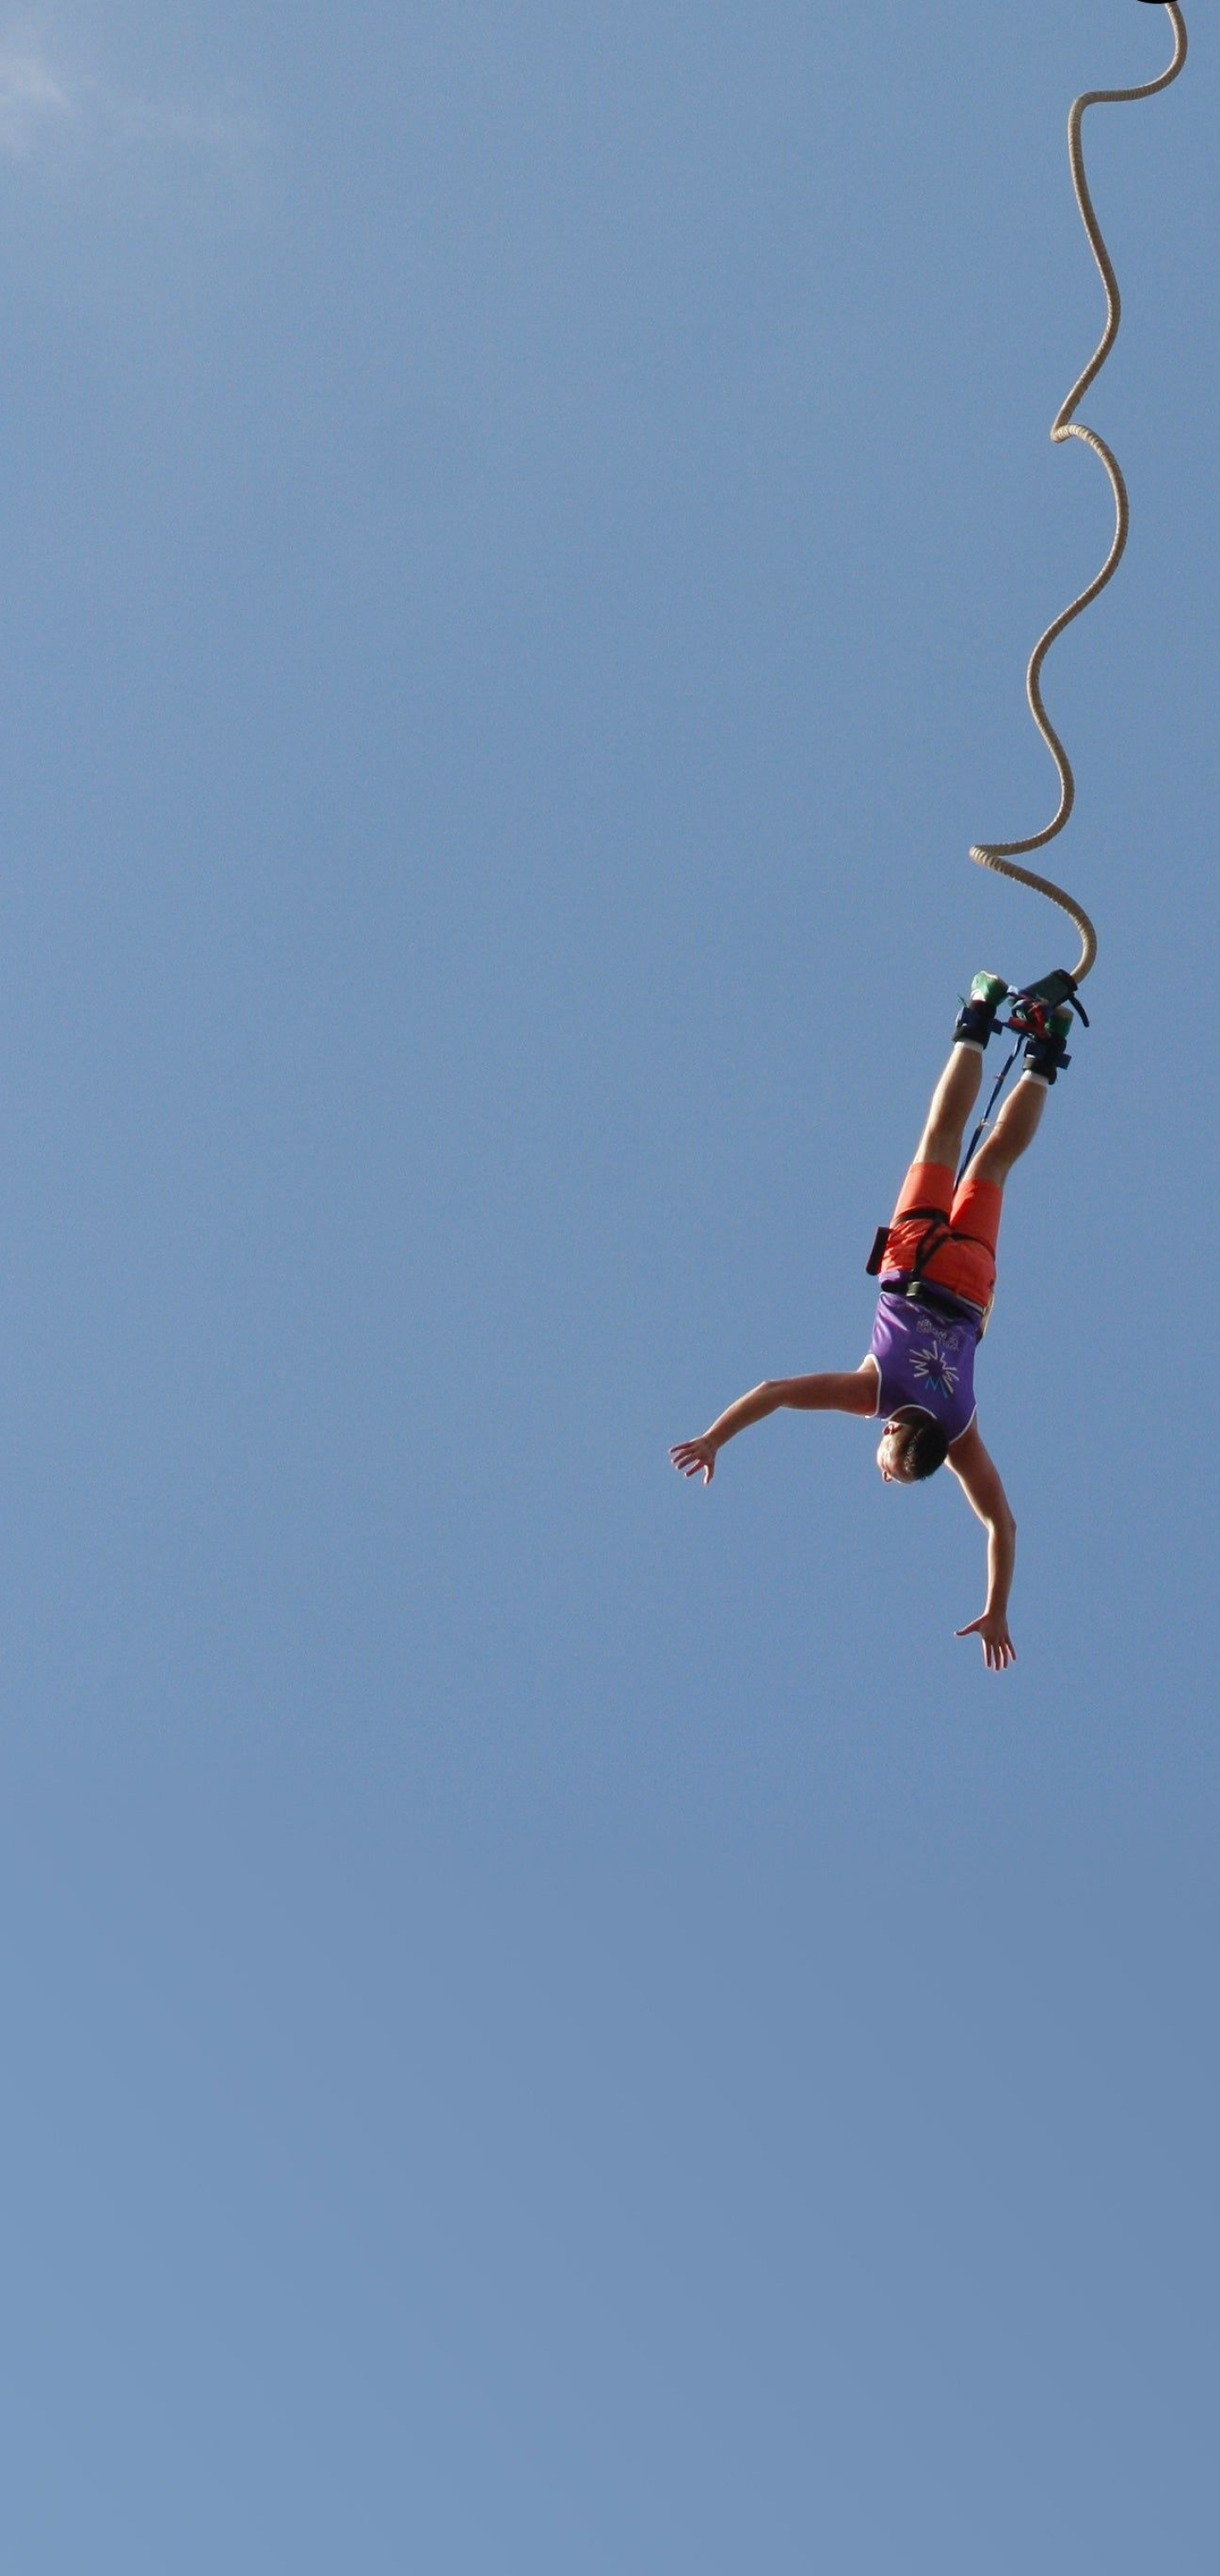 Bungee Jumping: Ultra-durable elastic cord, A body harness, Equipment necessary for survival after a jump. 1440x3040 HD Wallpaper.